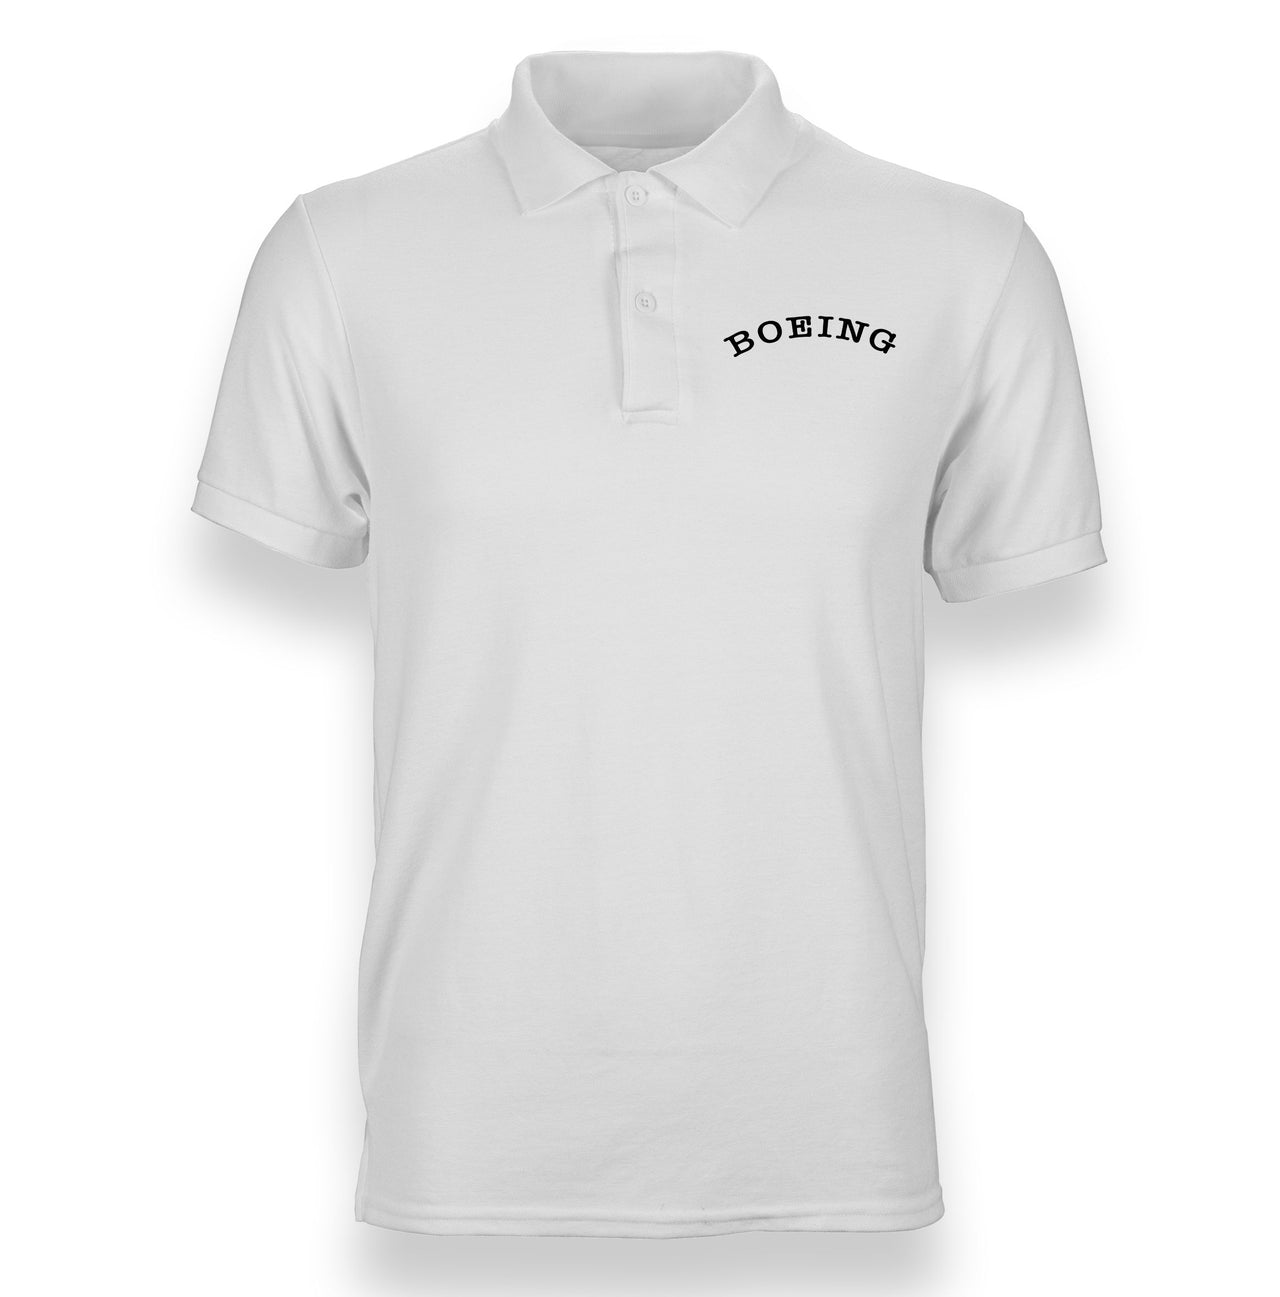 Special BOEING Text Designed Polo T-Shirts